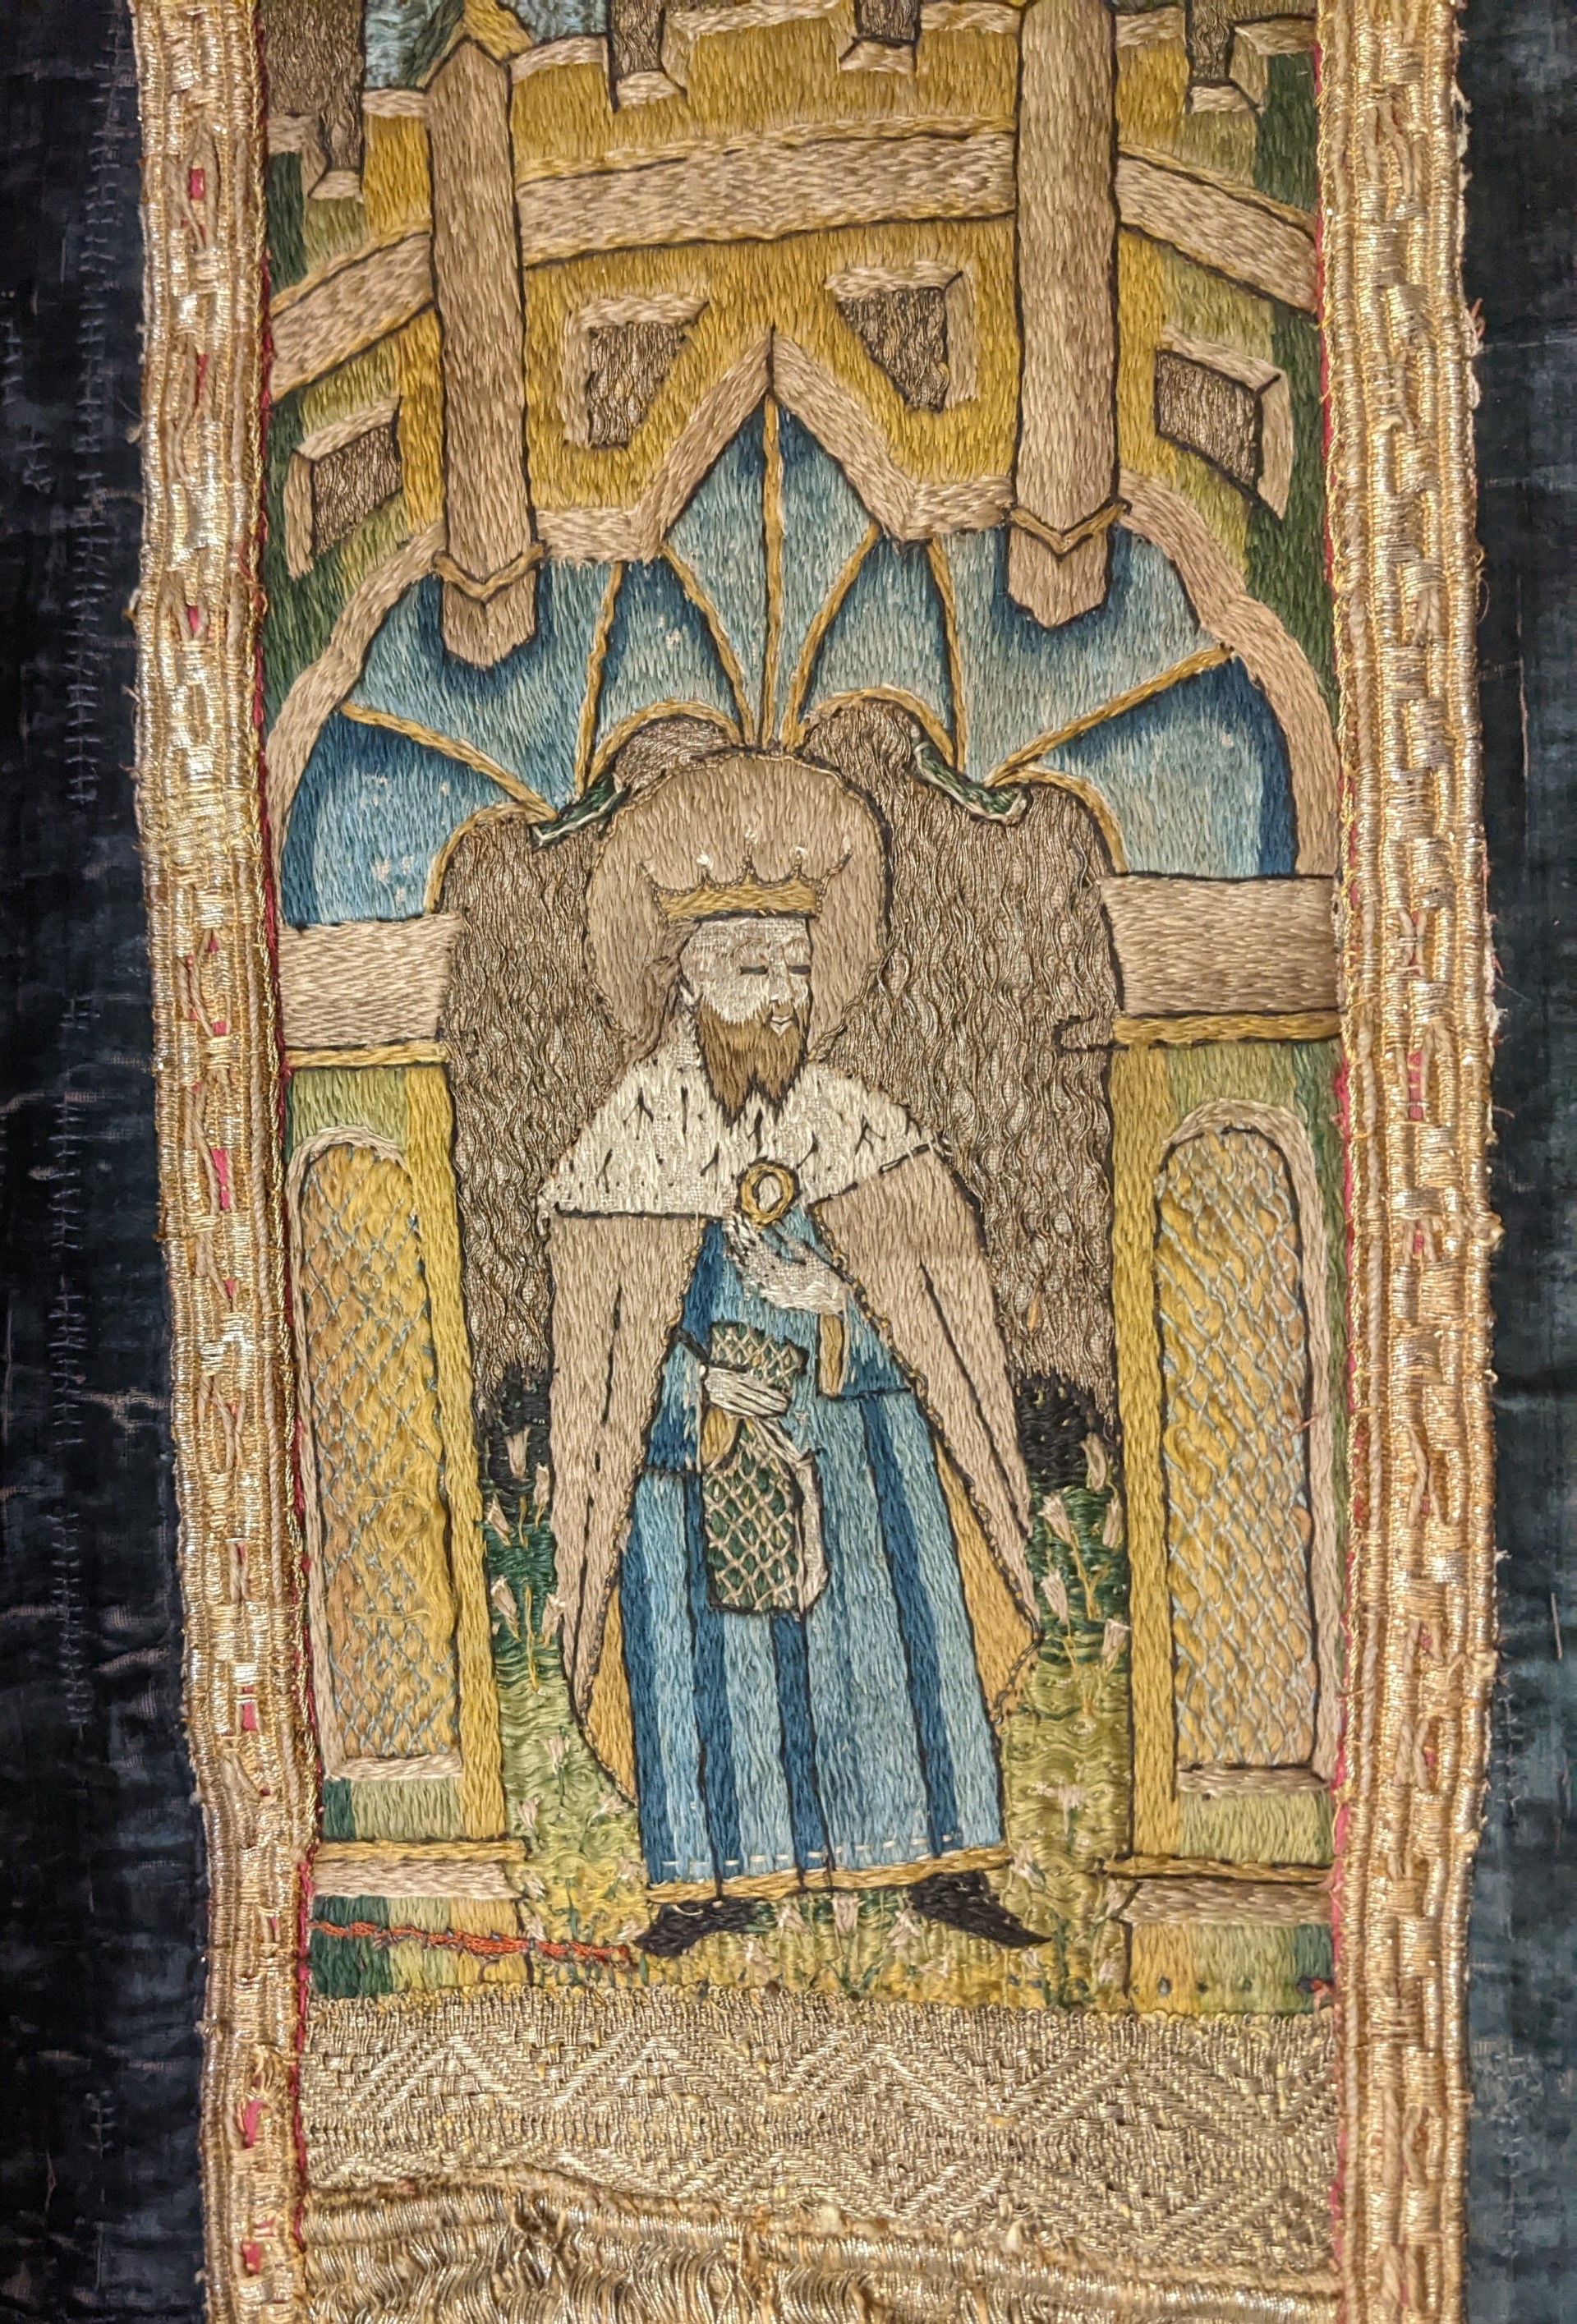 A close-up of St. Edward the Confessor with a ring on the Basset vestment.